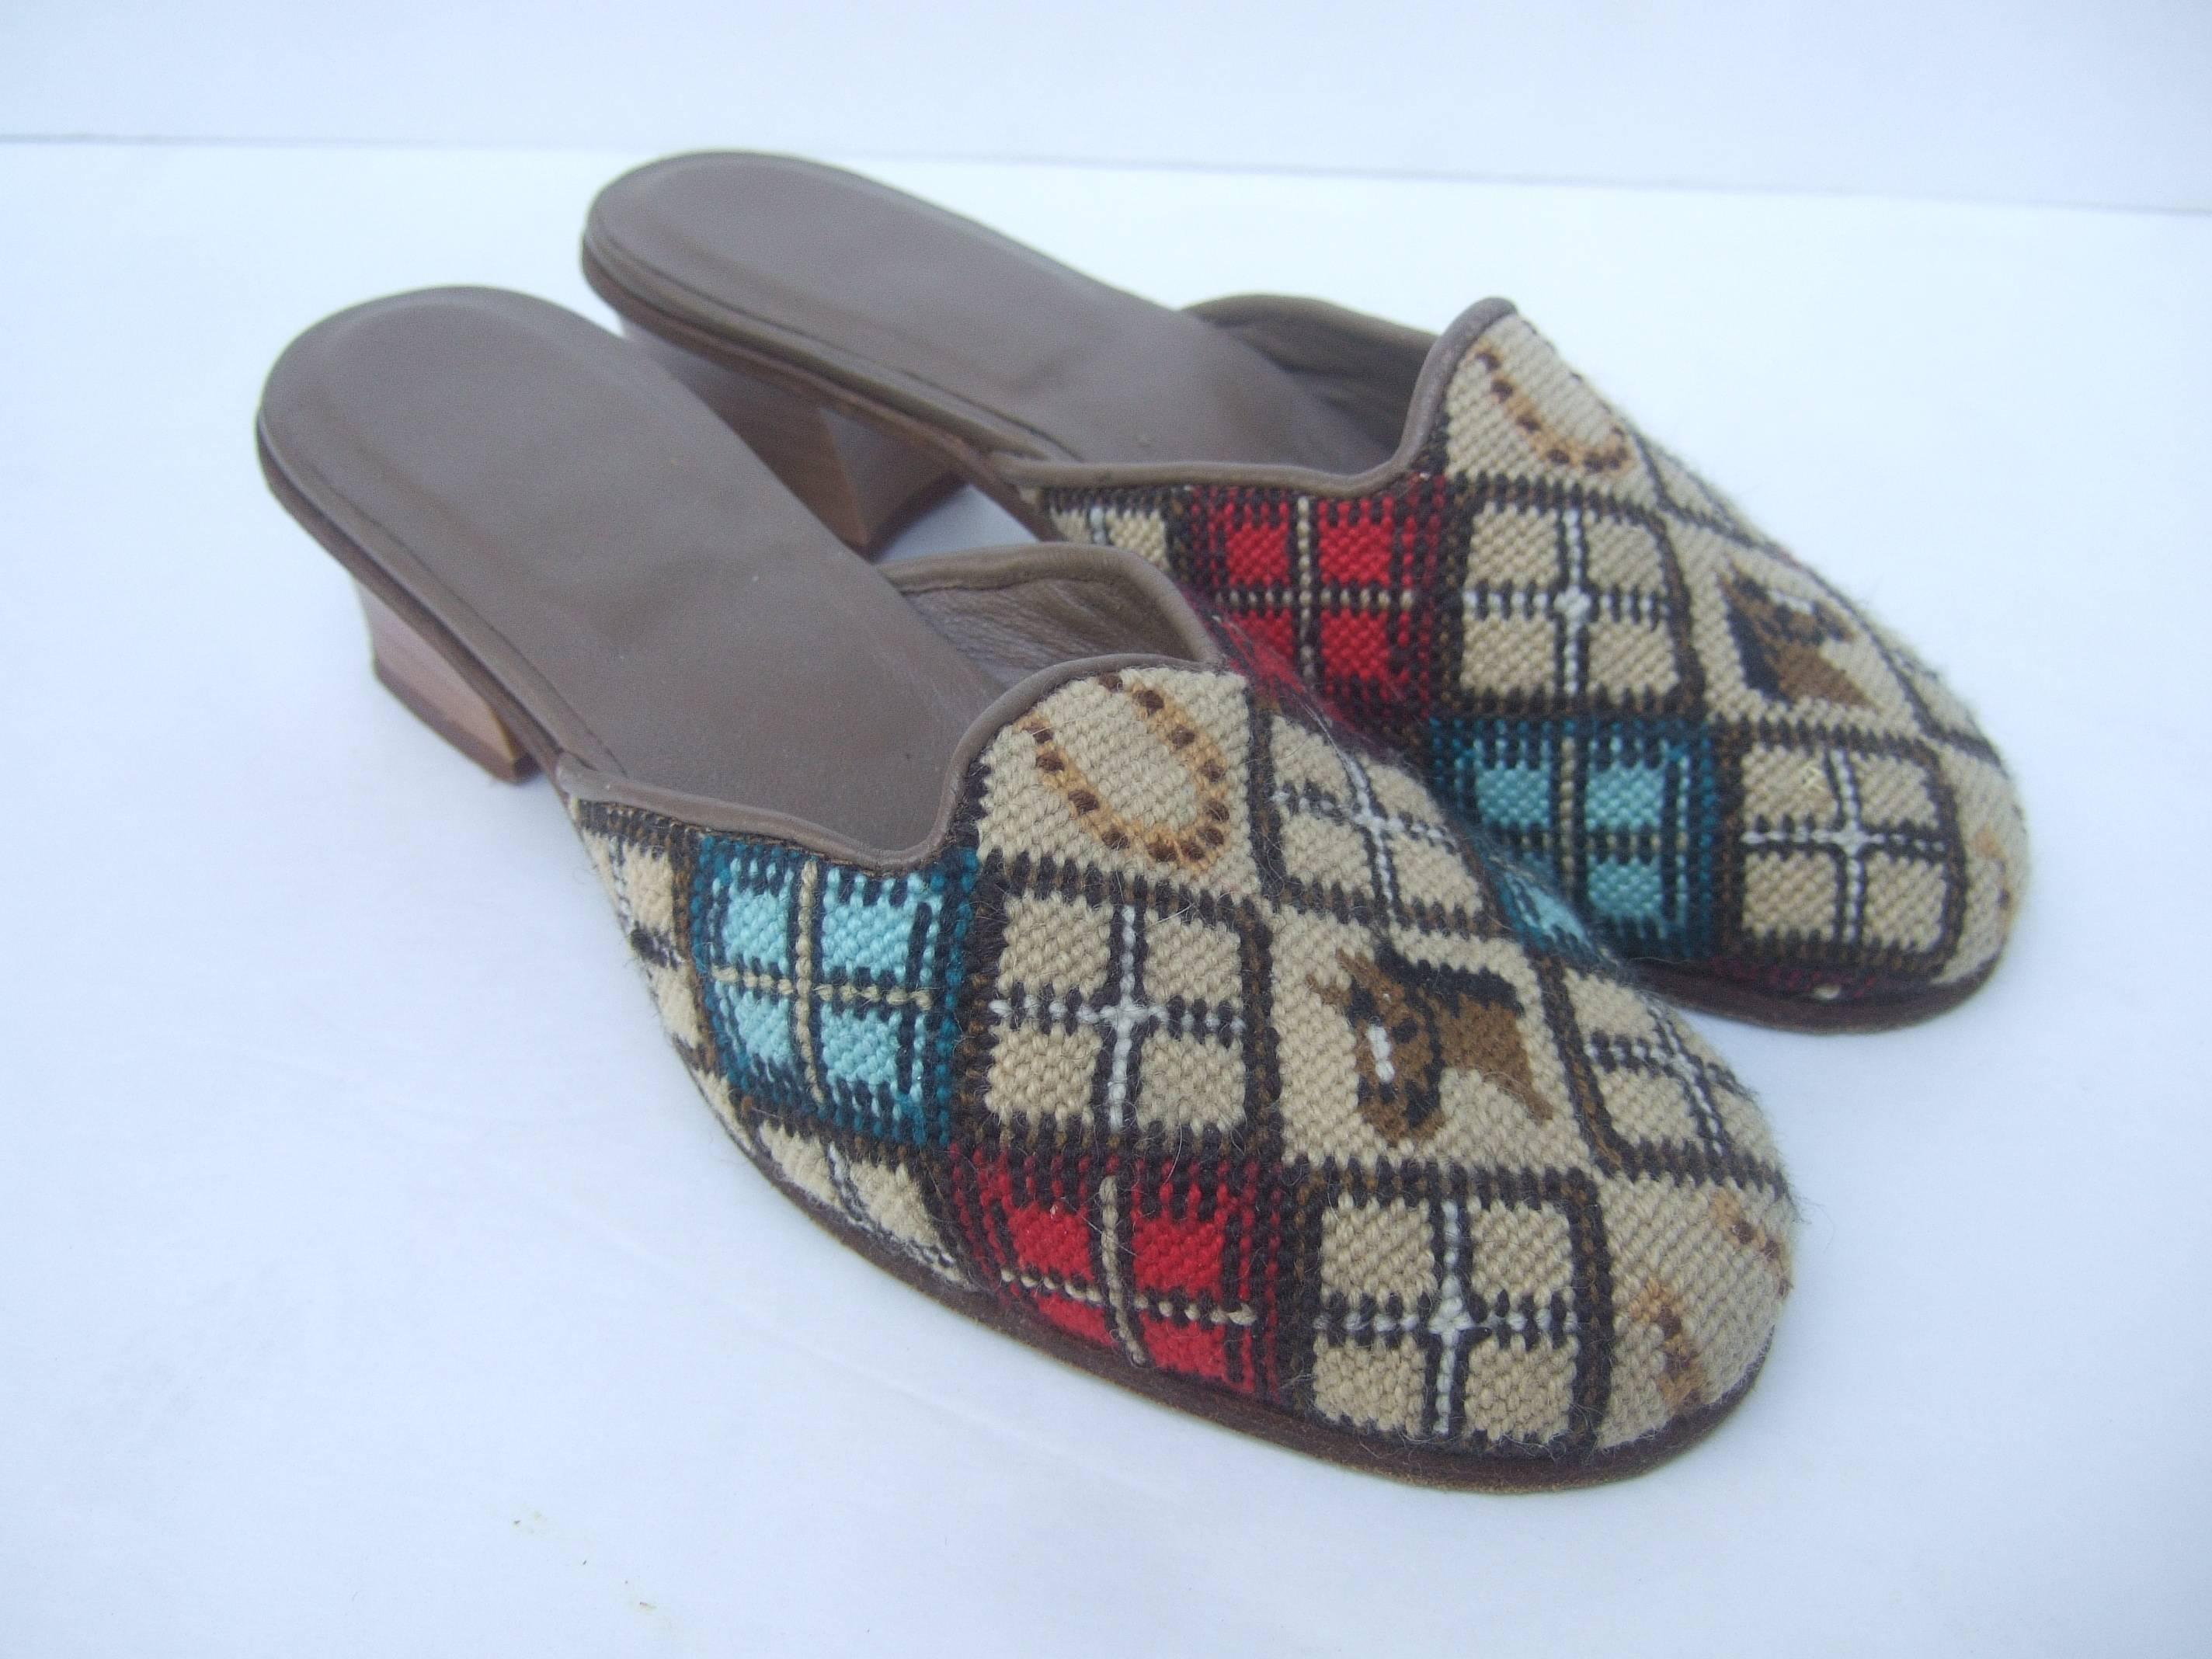 Charming Needlepoint Equine Slipper Shoes Made in Italy c 1980 5